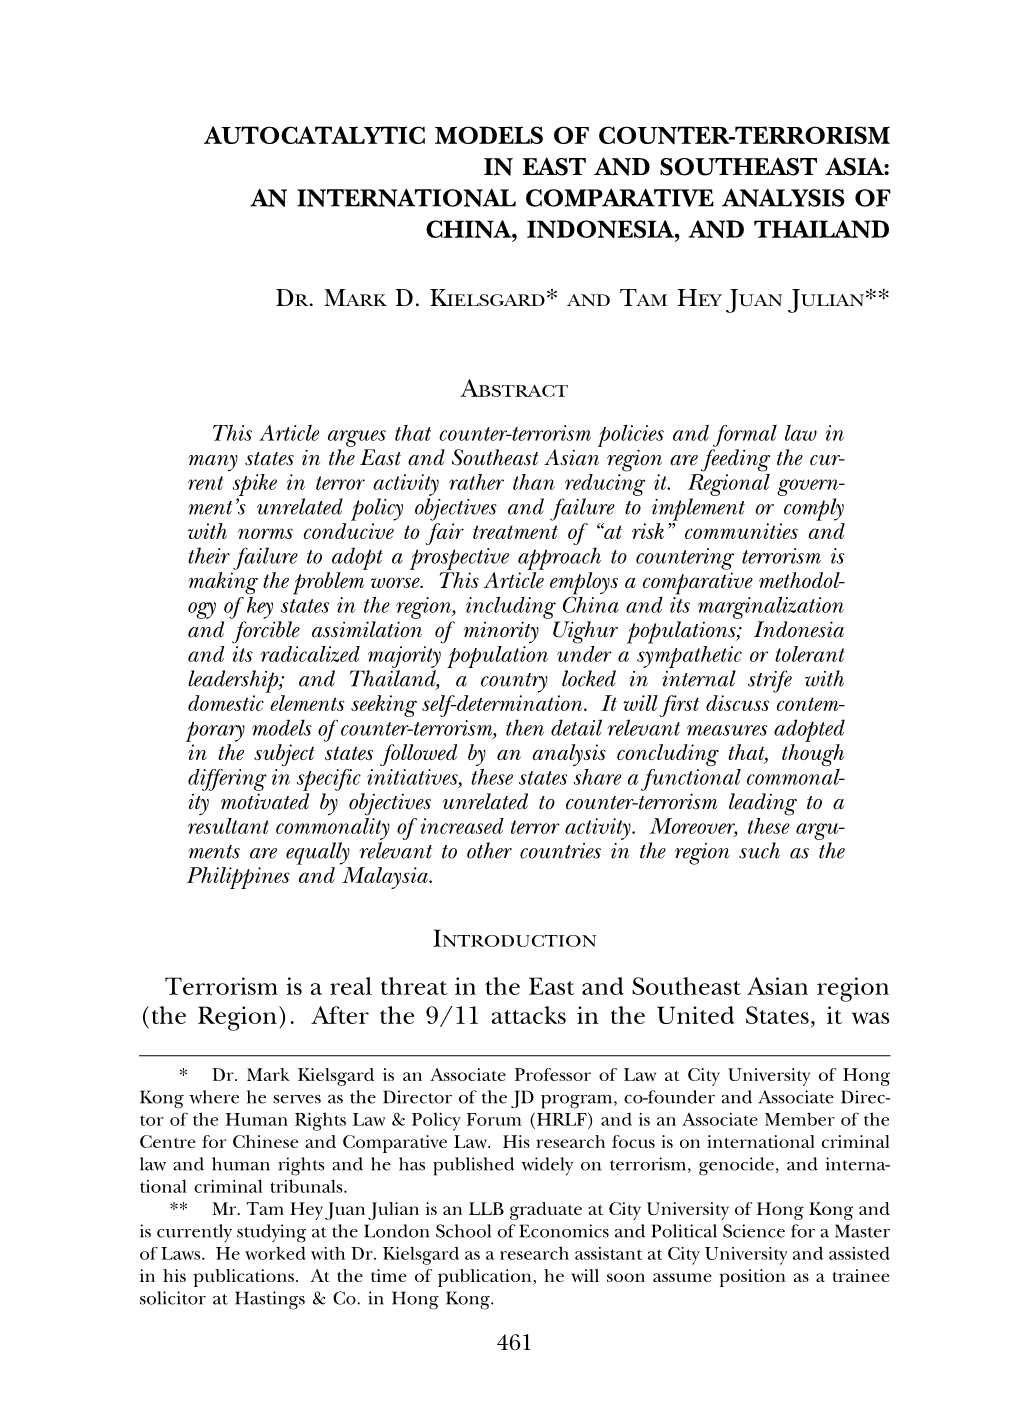 Autocatalytic Models of Counter-Terrorism in East and Southeast Asia: an International Comparative Analysis of China, Indonesia, and Thailand